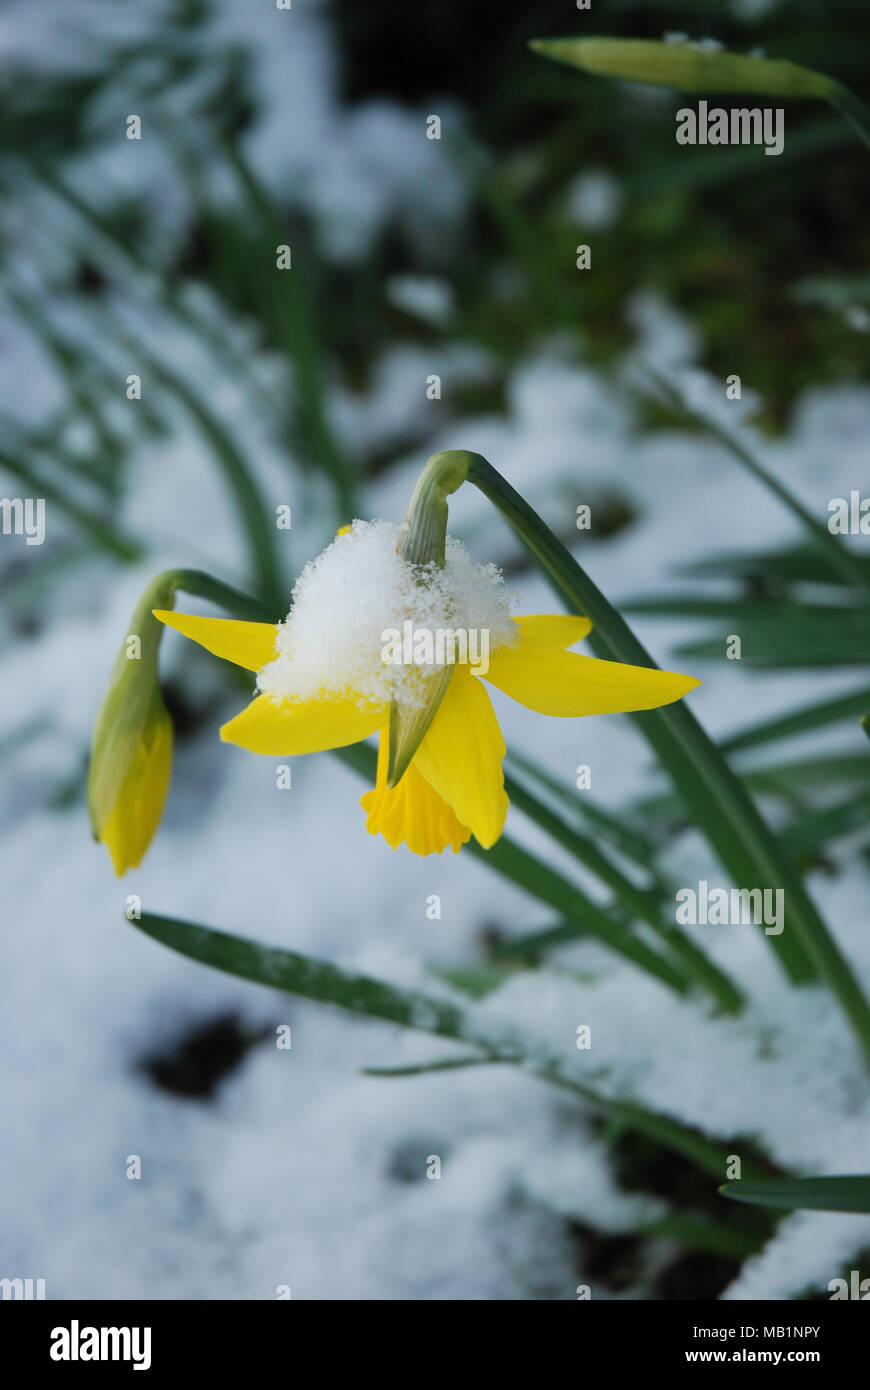 Daffodils in the snow Stock Photo